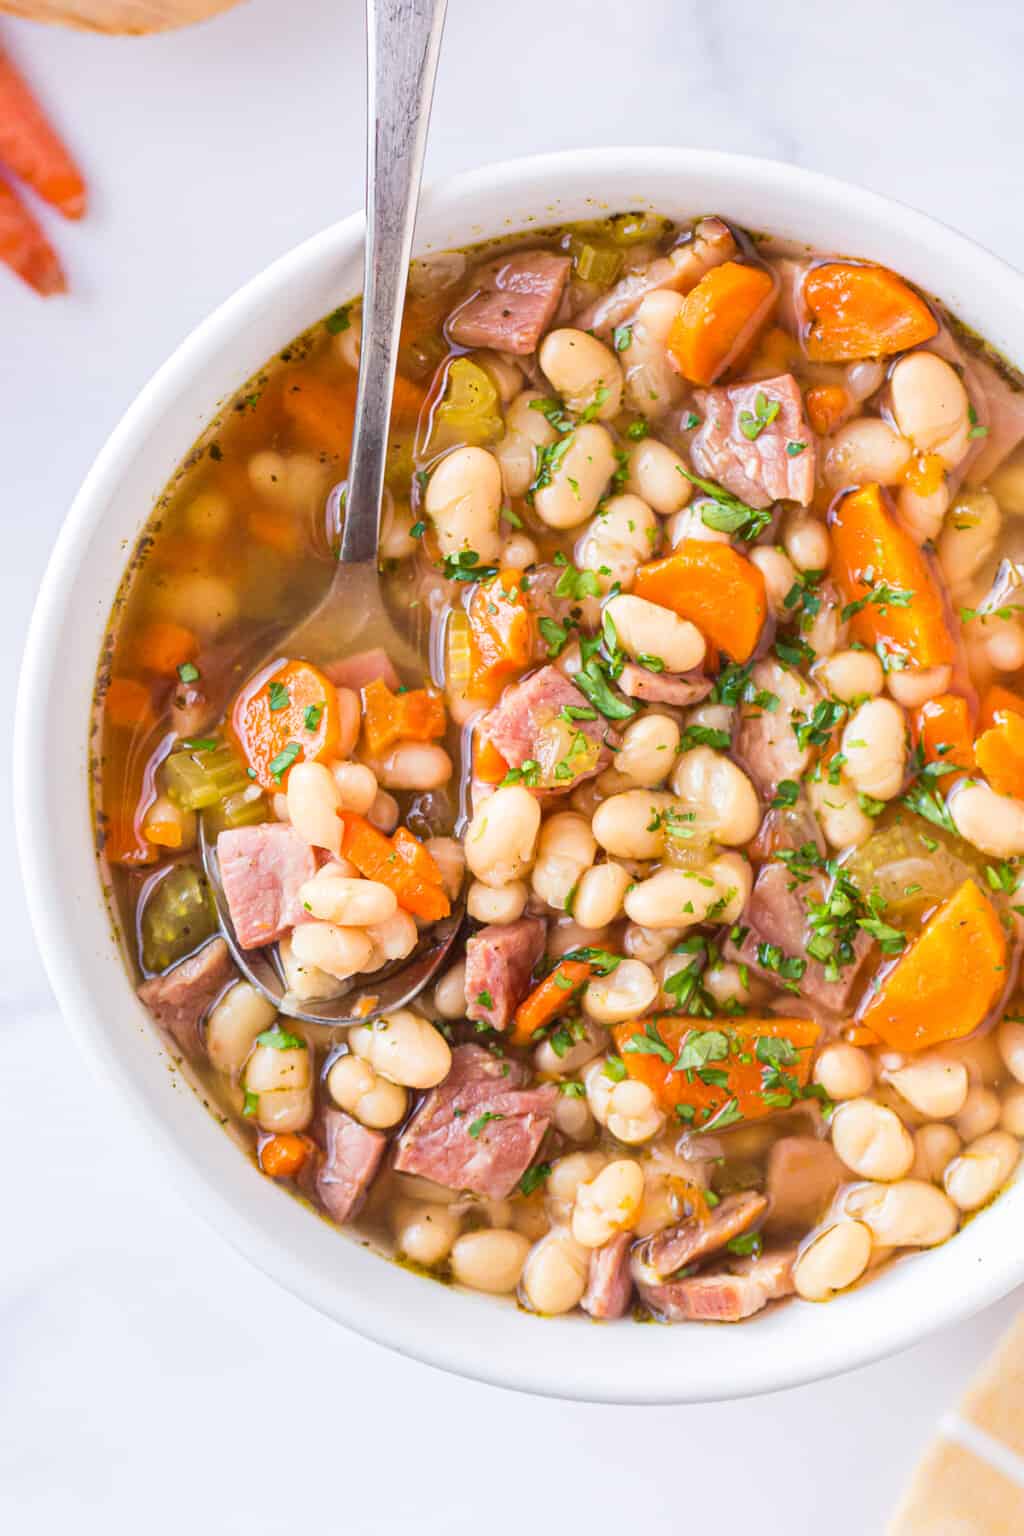 Instant Pot Ham And Bean Soup Recipe The Cookie Rookie®